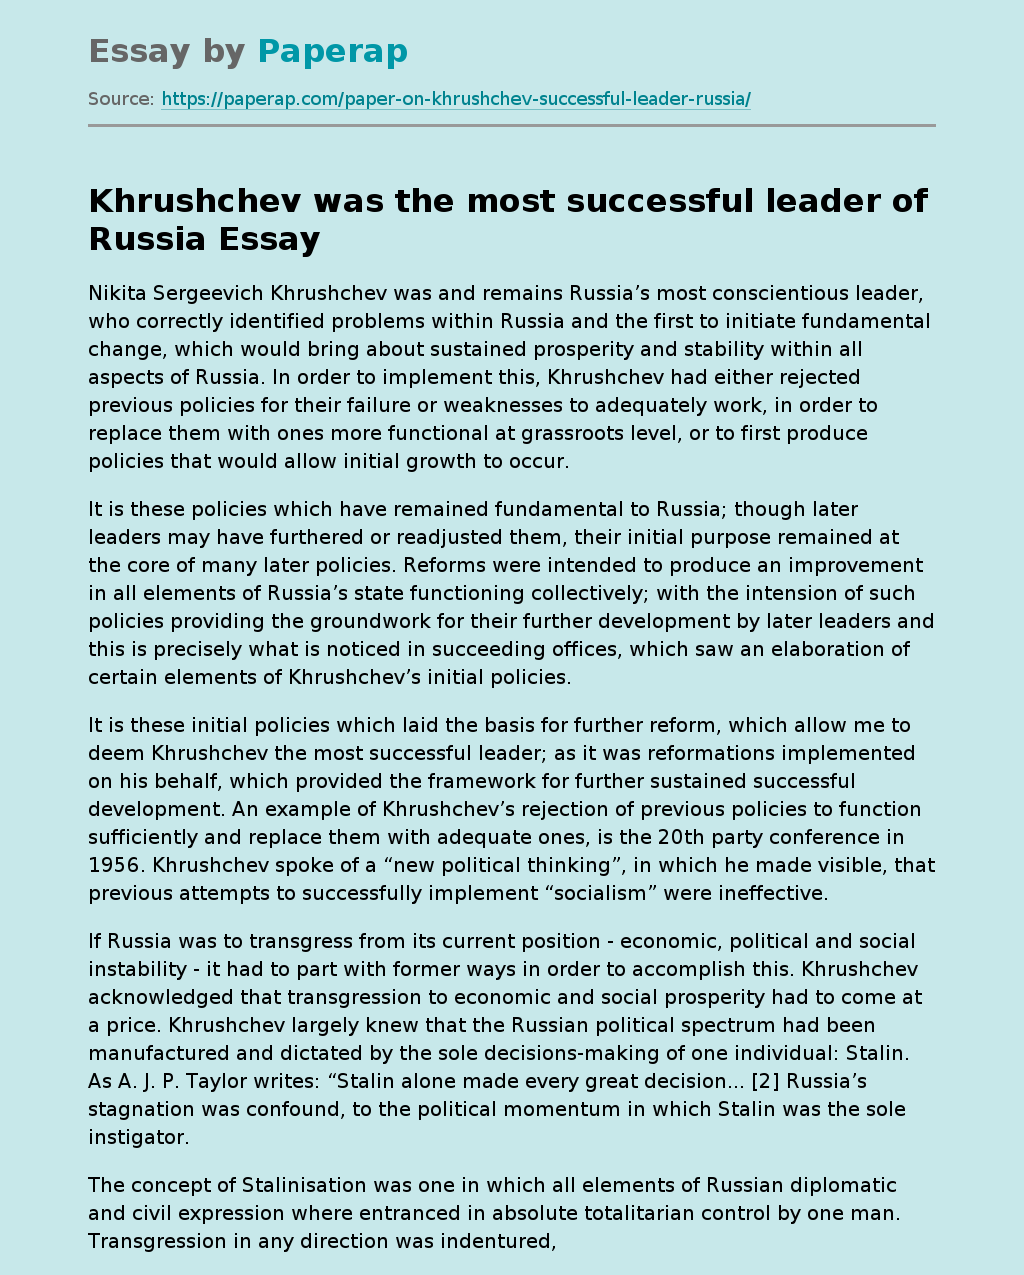 Khrushchev was the most successful leader of Russia